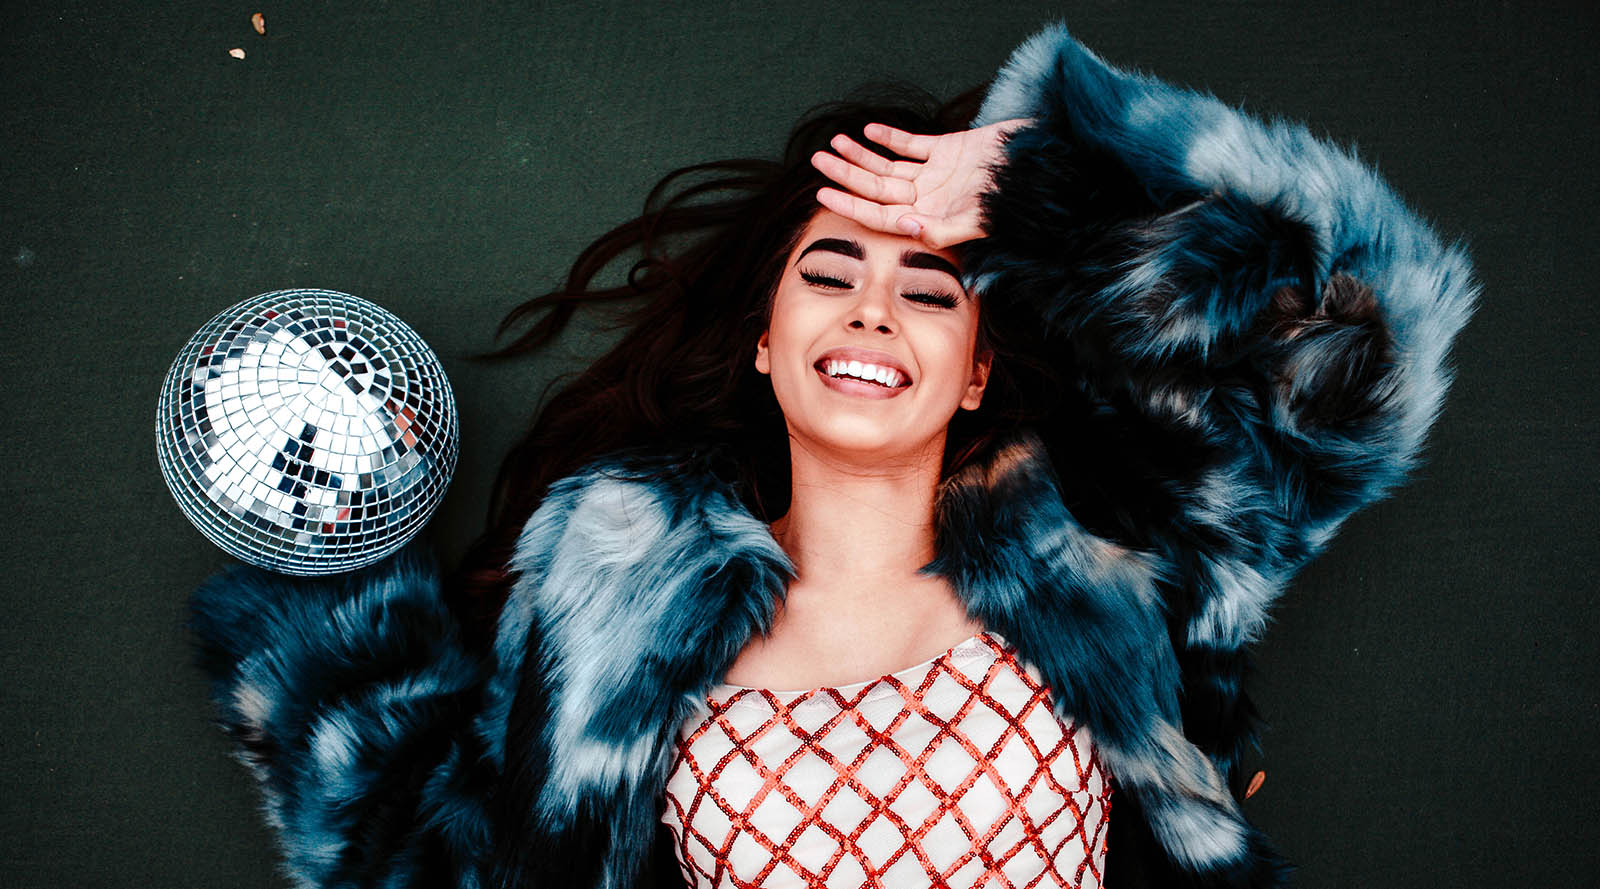 girl lying down with hand over forehead wearing faux fur coat, red and white shirt, and disco ball